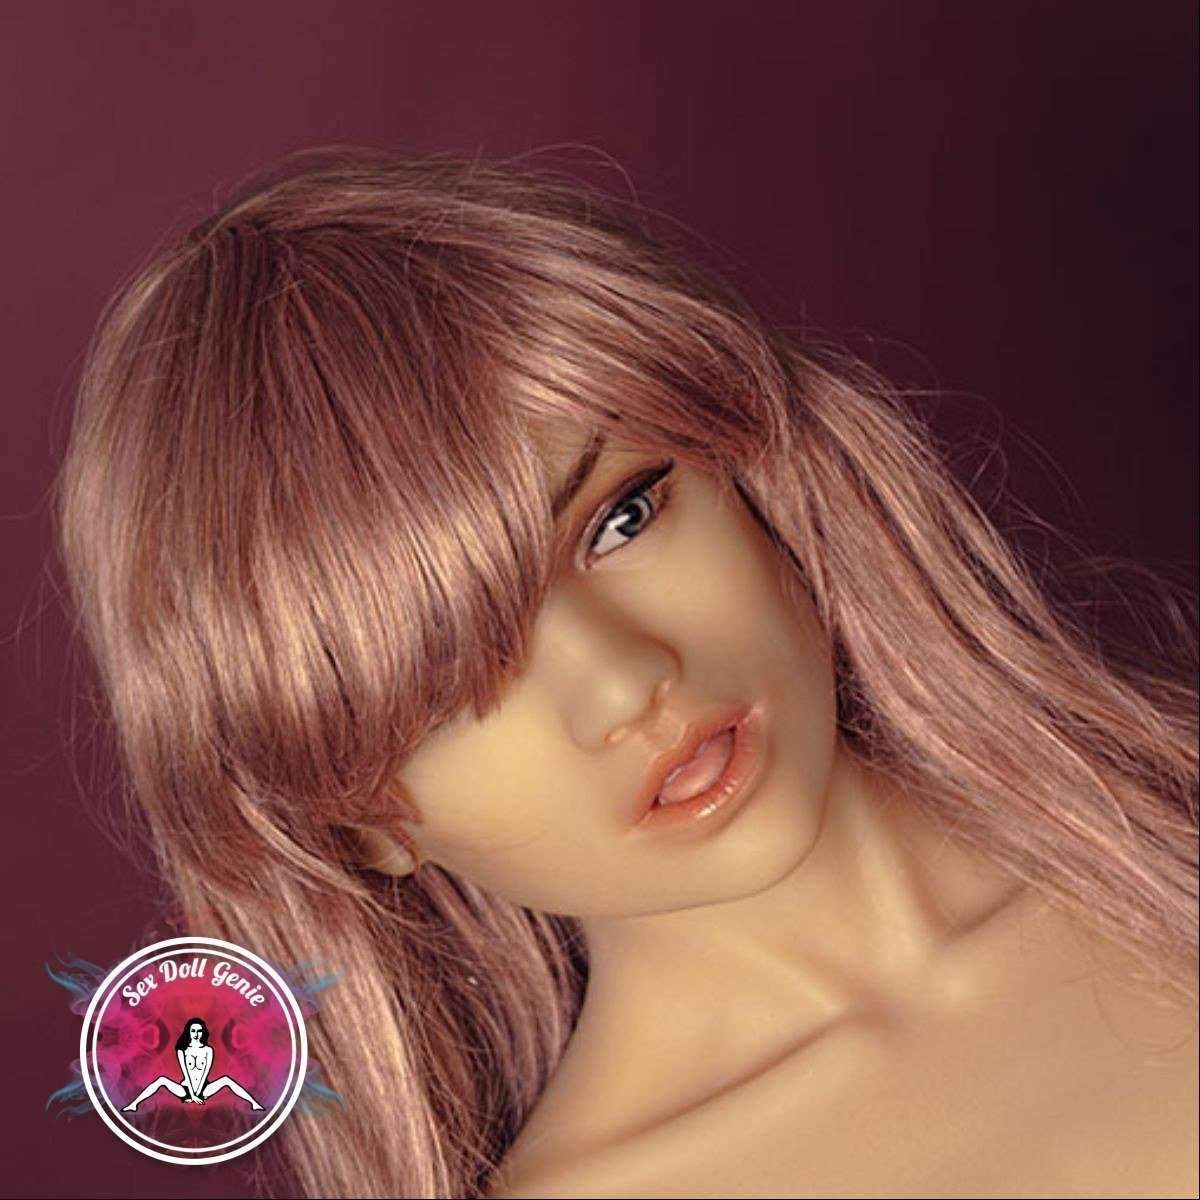 DS Doll - 163 - Mandy Head - Type 1 D Cup Silicone Doll-5